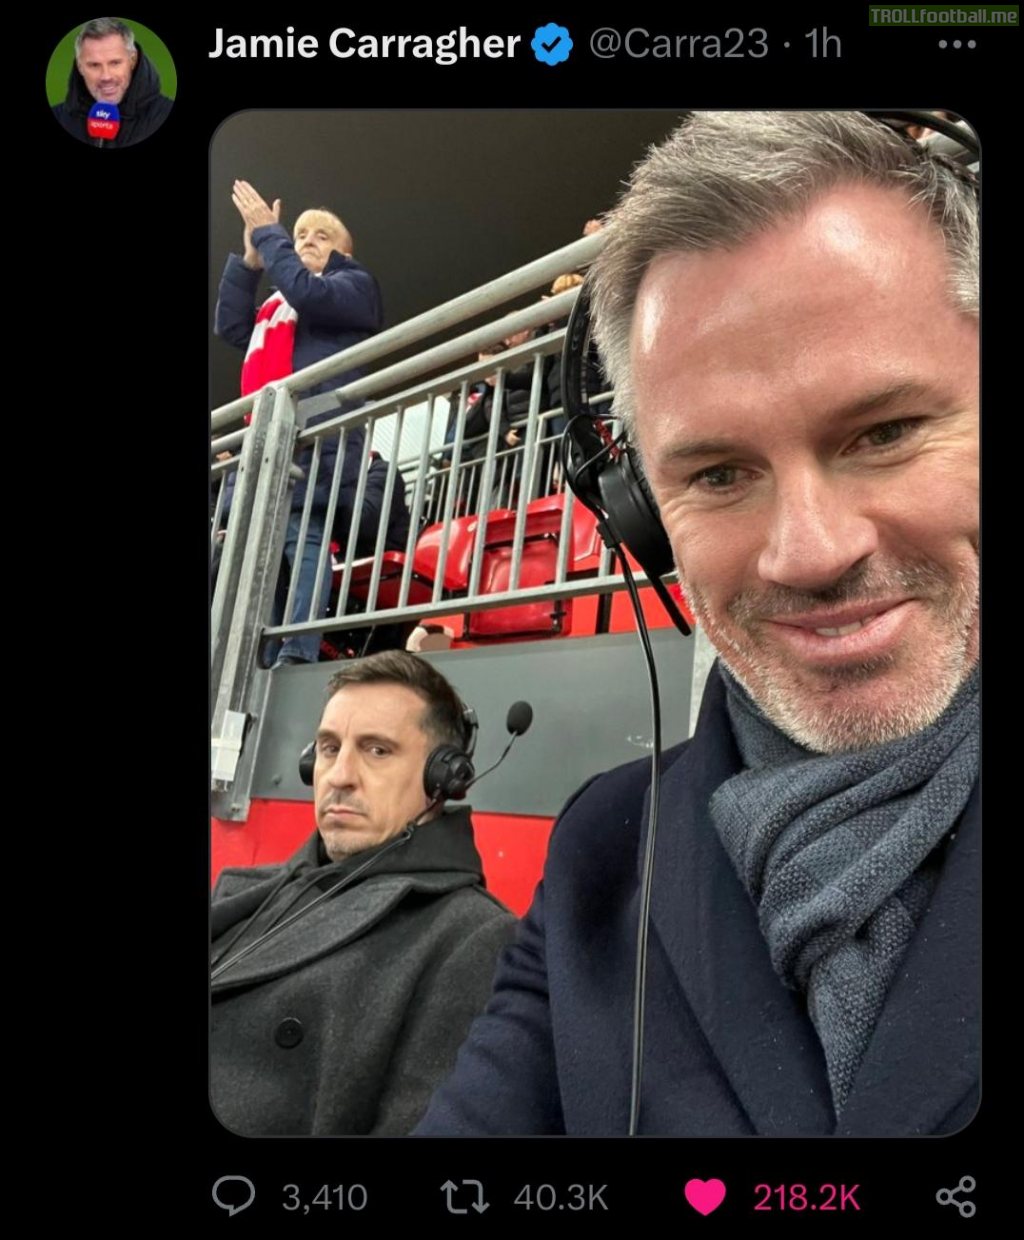 Jamie Carragher's selfie with Gary Neville after the 5th goal